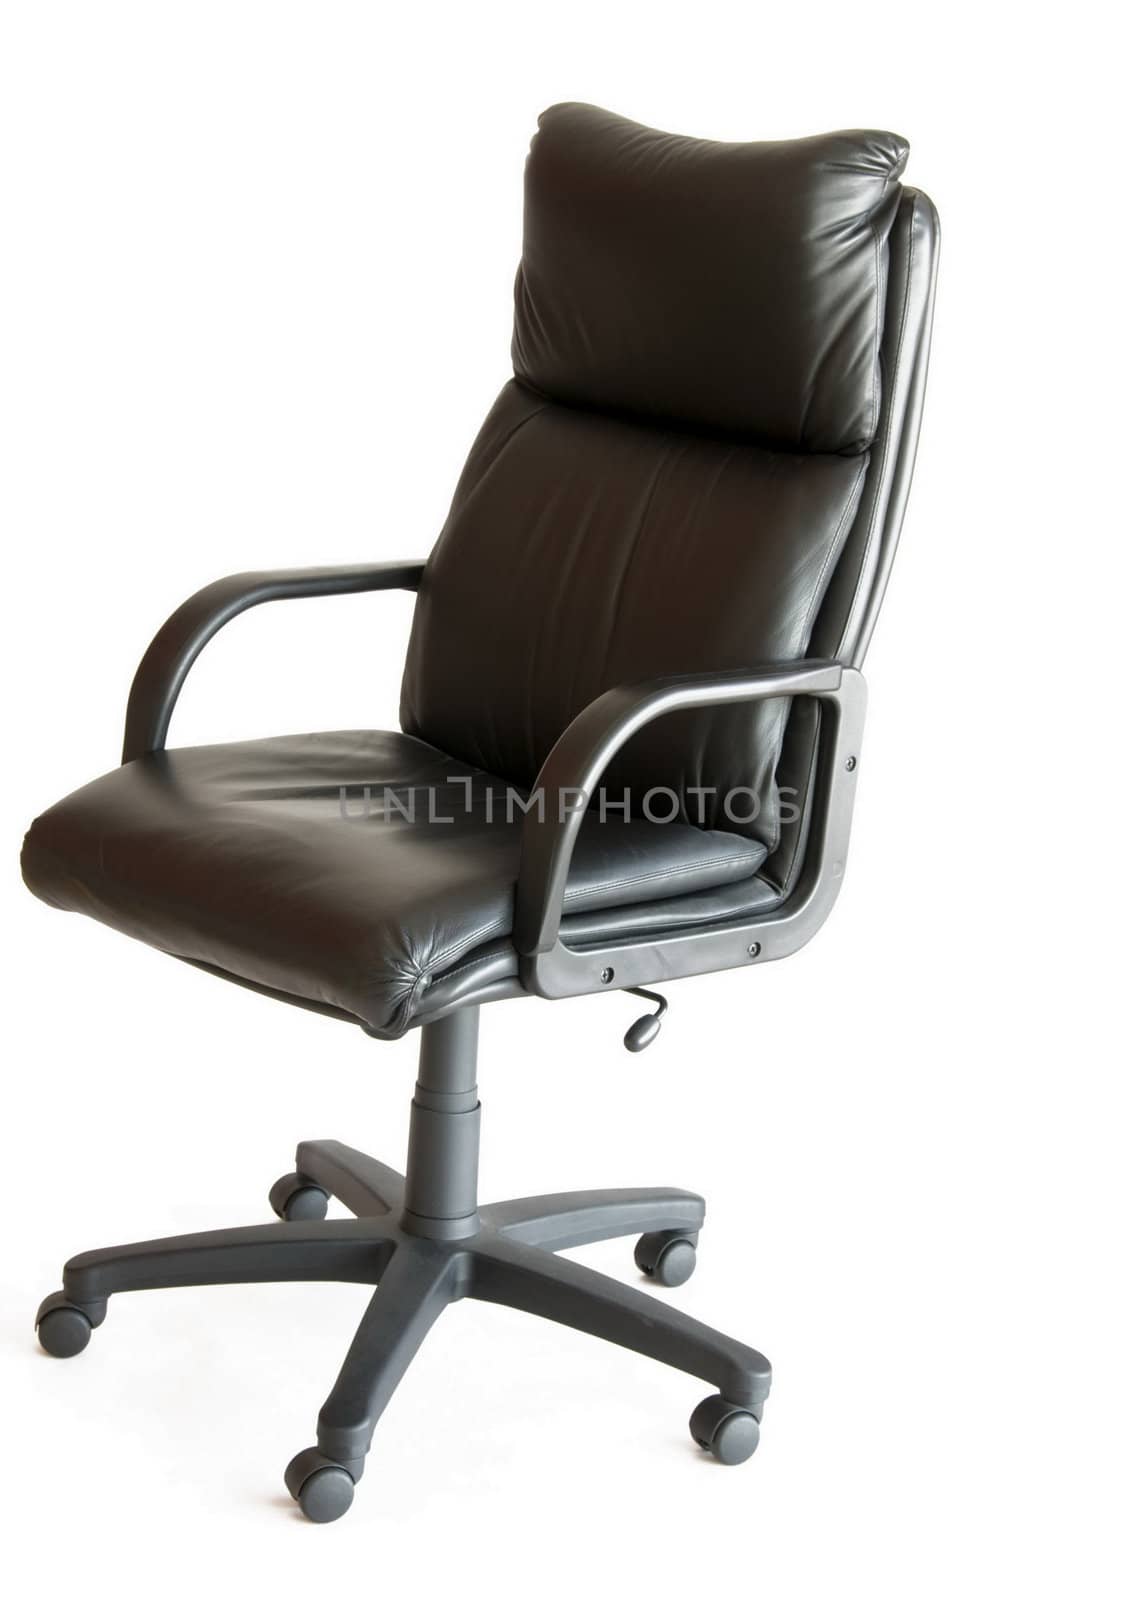 leather chair for office on a white background